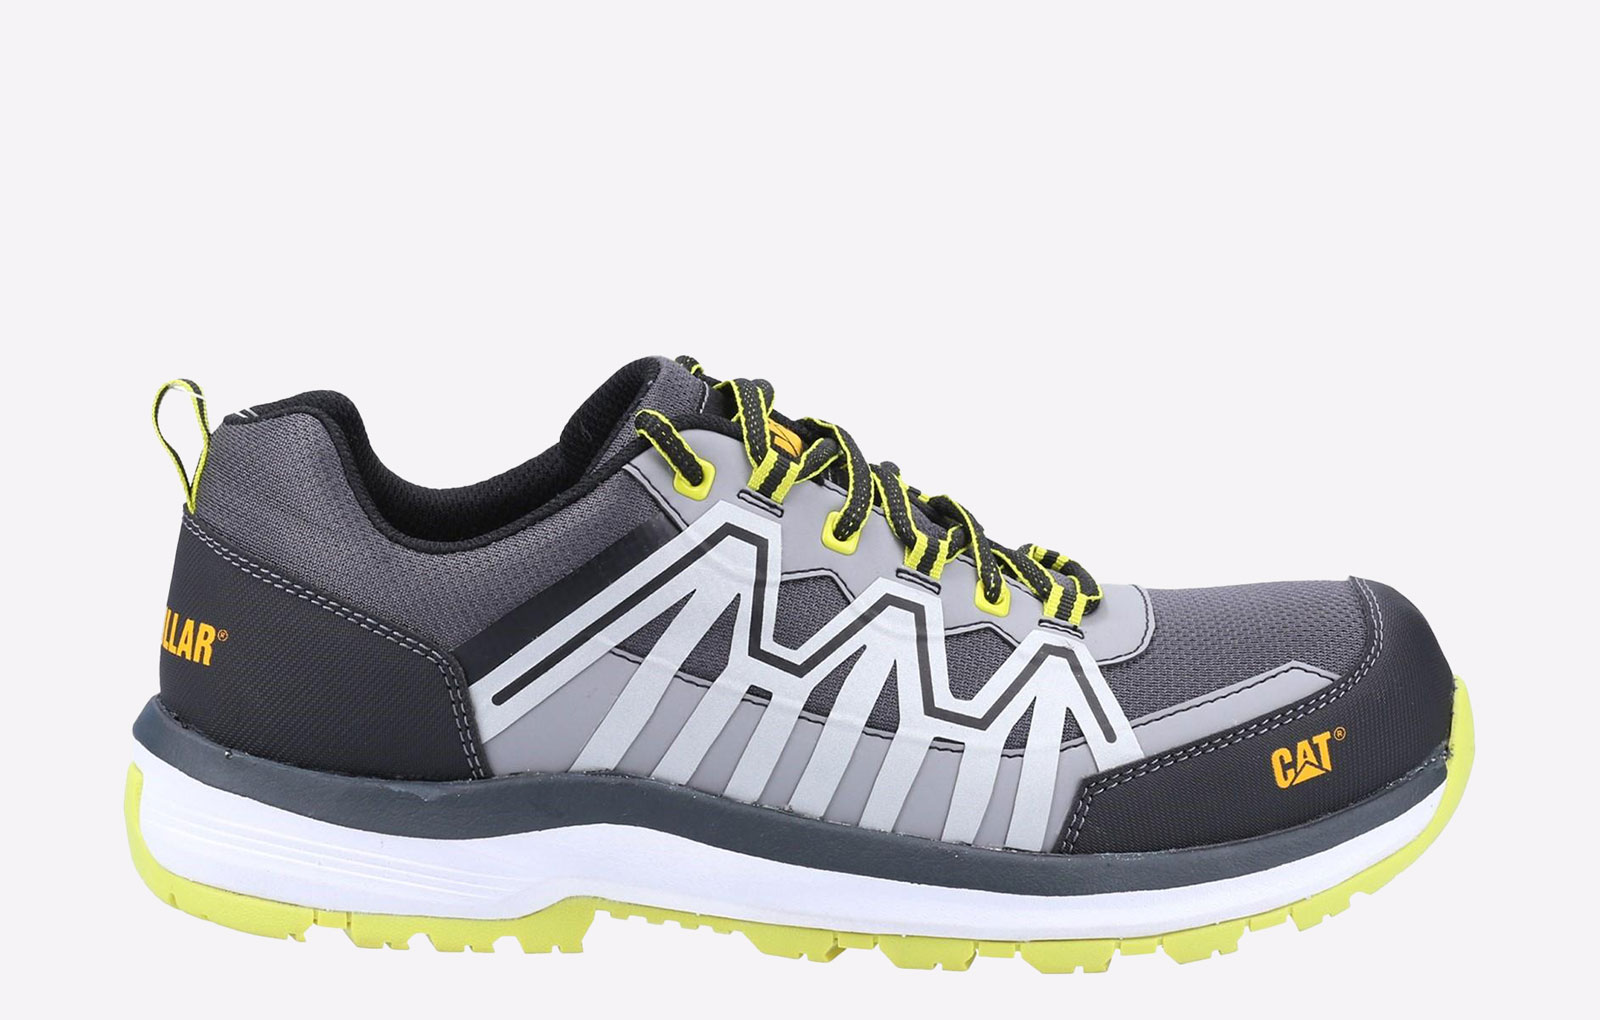 Caterpillar Charge S3 Safety Trainers Mens - GRD-35309-65872-11